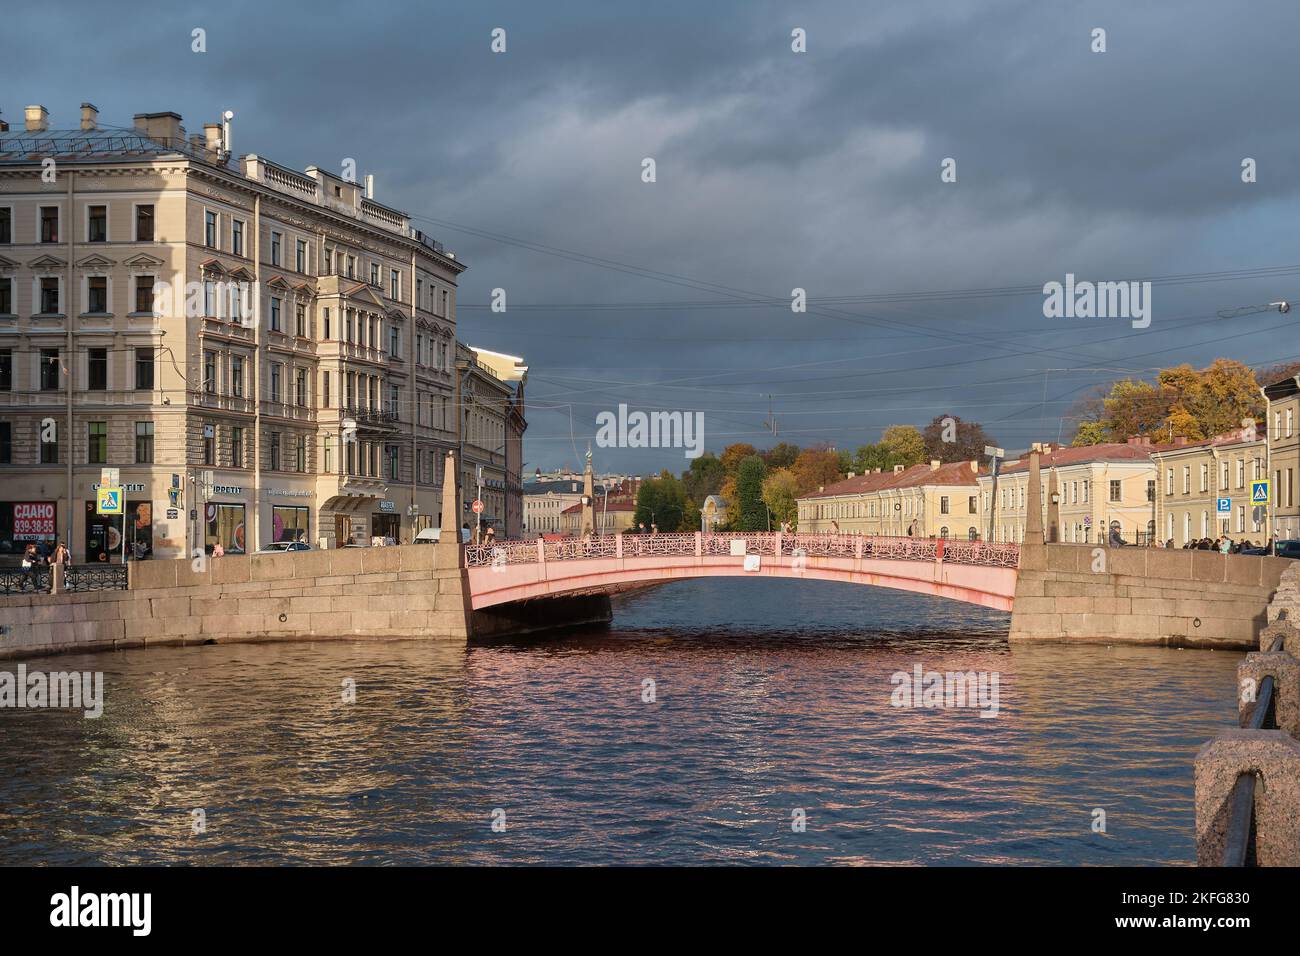 View of the Red Arch Bridge over the Moika River, built in 1814, landmark, cityscape: St. Petersburg, Russia - October 07, 2022 Stock Photo